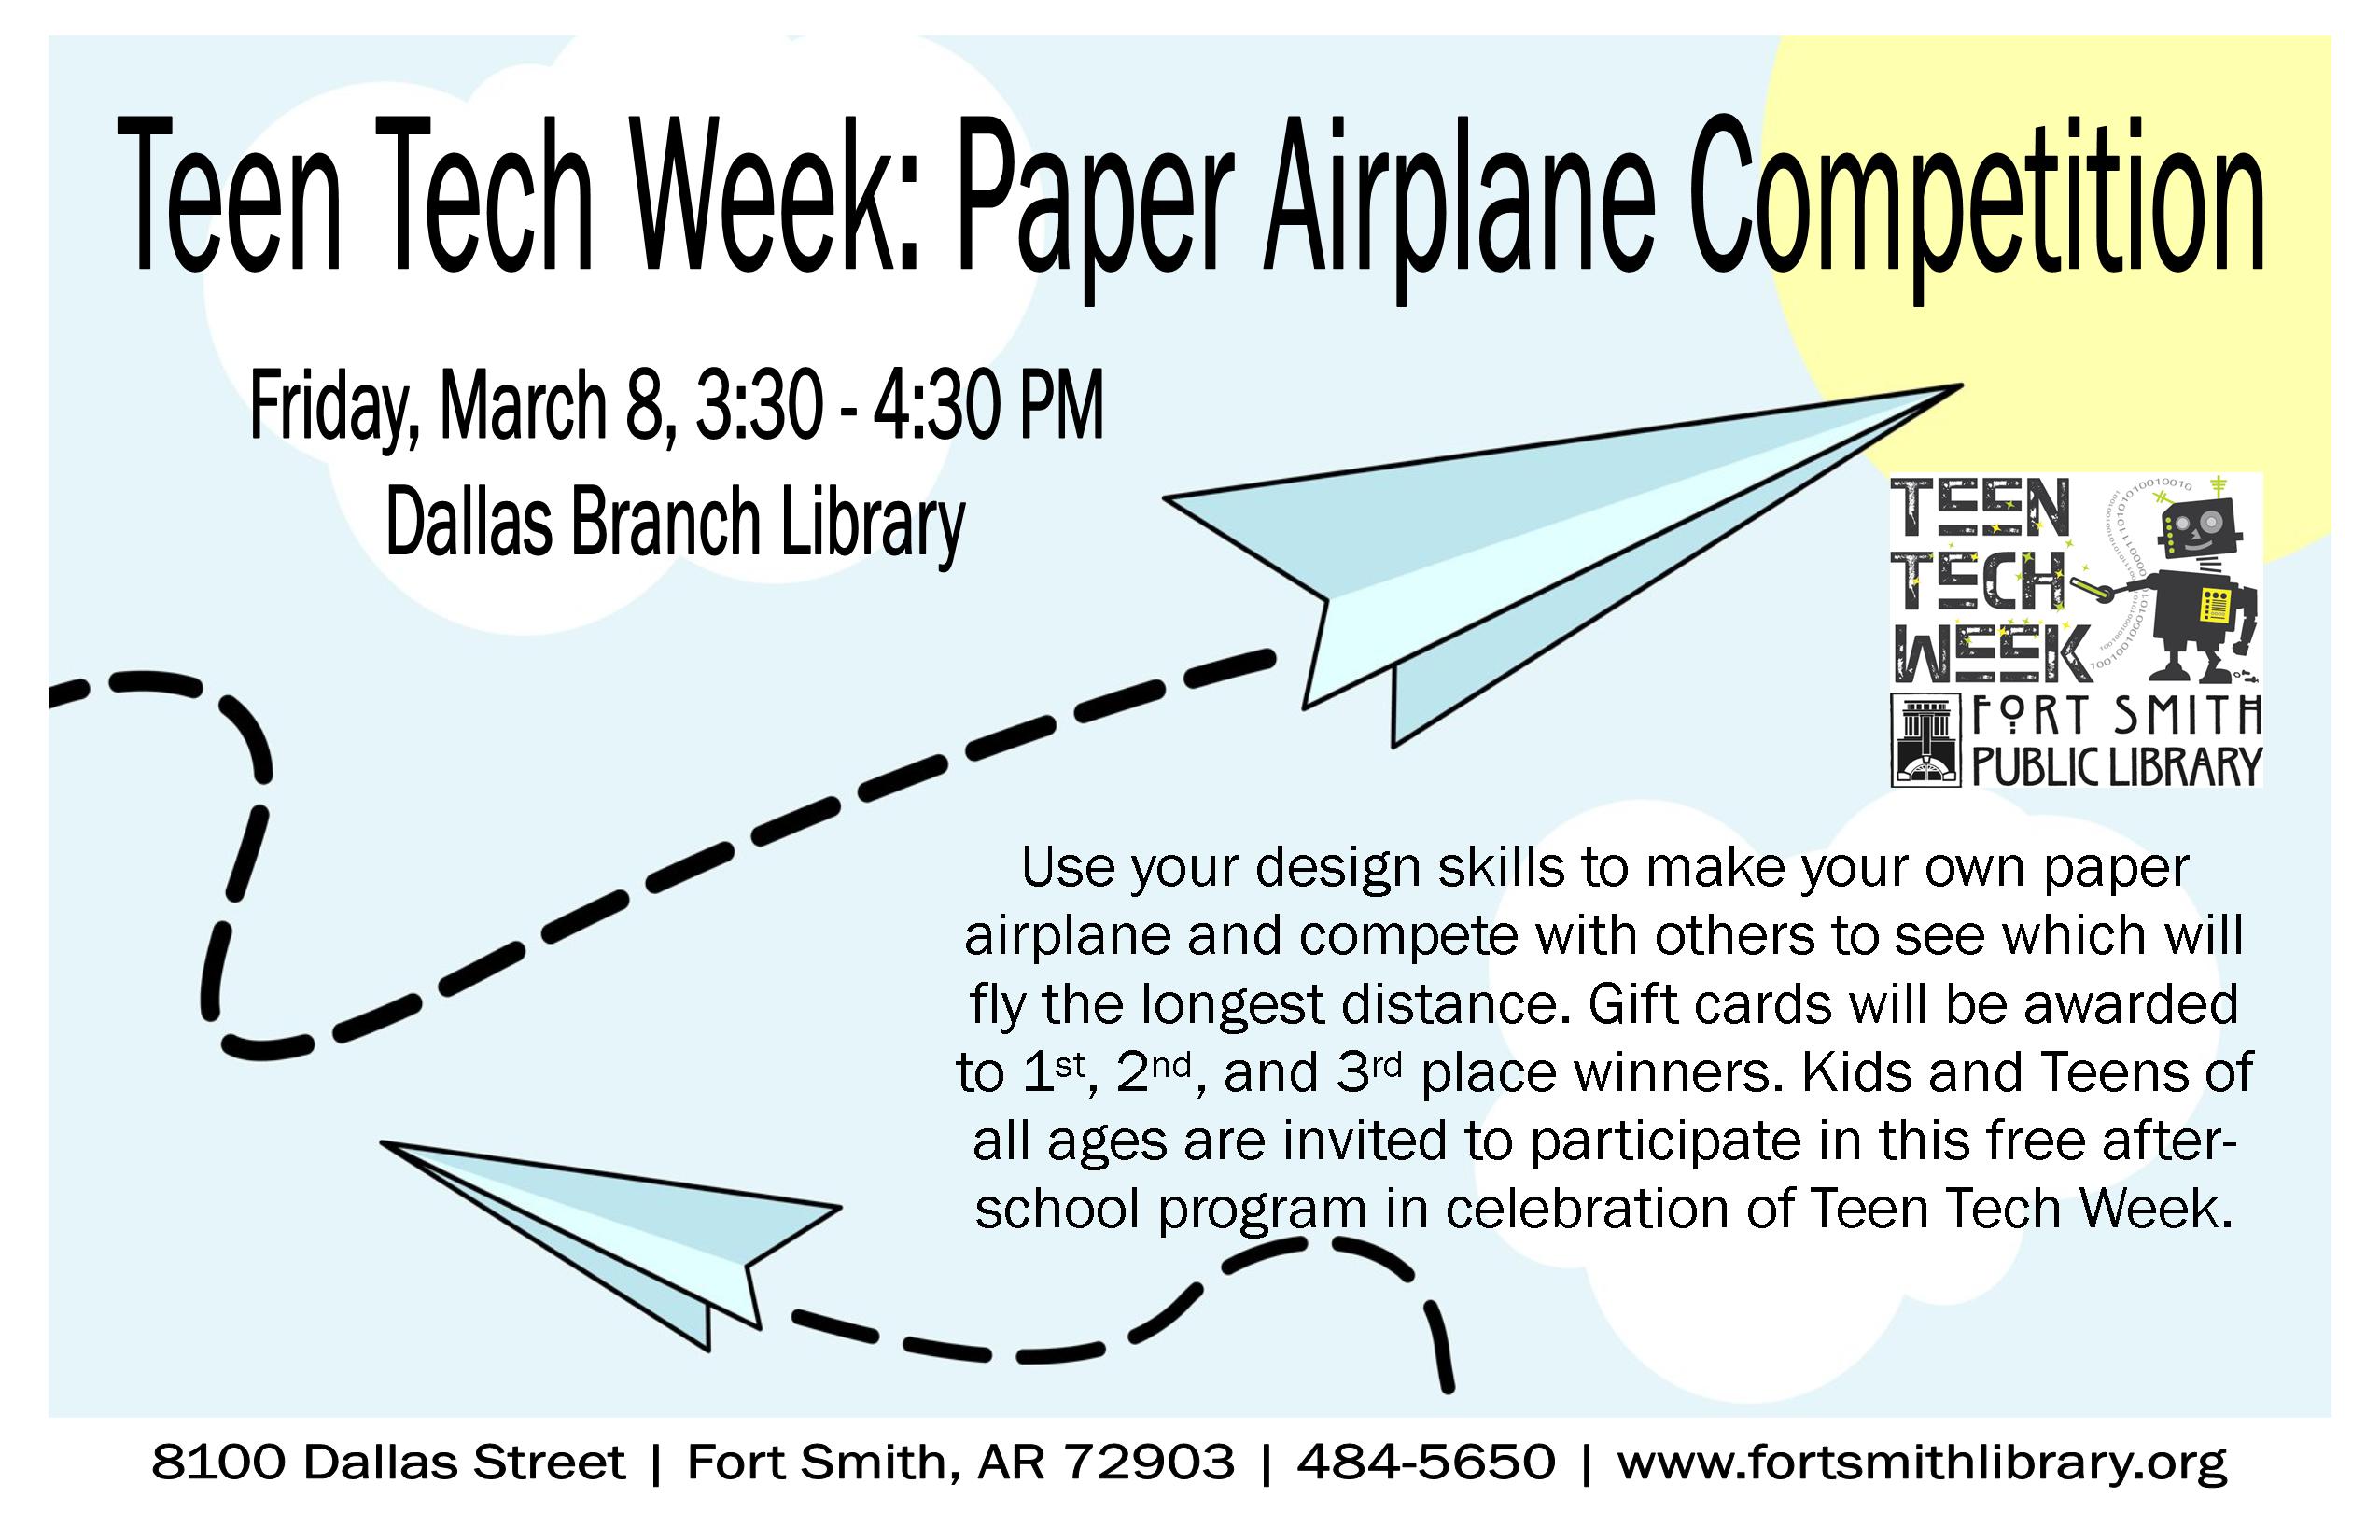 Teen Tech Week: Paper Airplane Competition informational banner